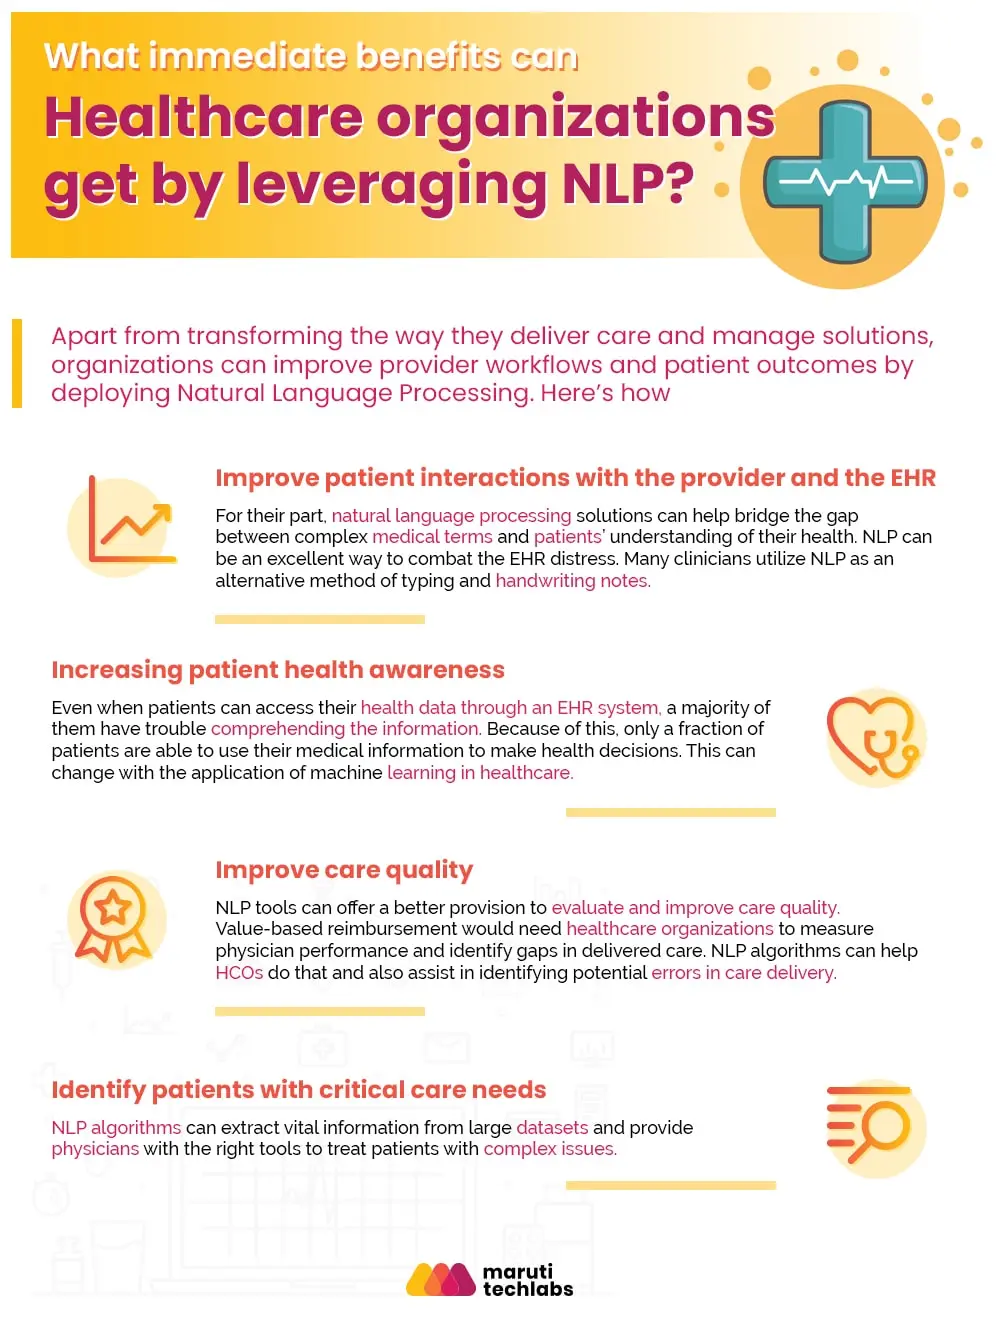 What Immediate Benefits Can Healthcare Organizations Get By Leveraging NLP?